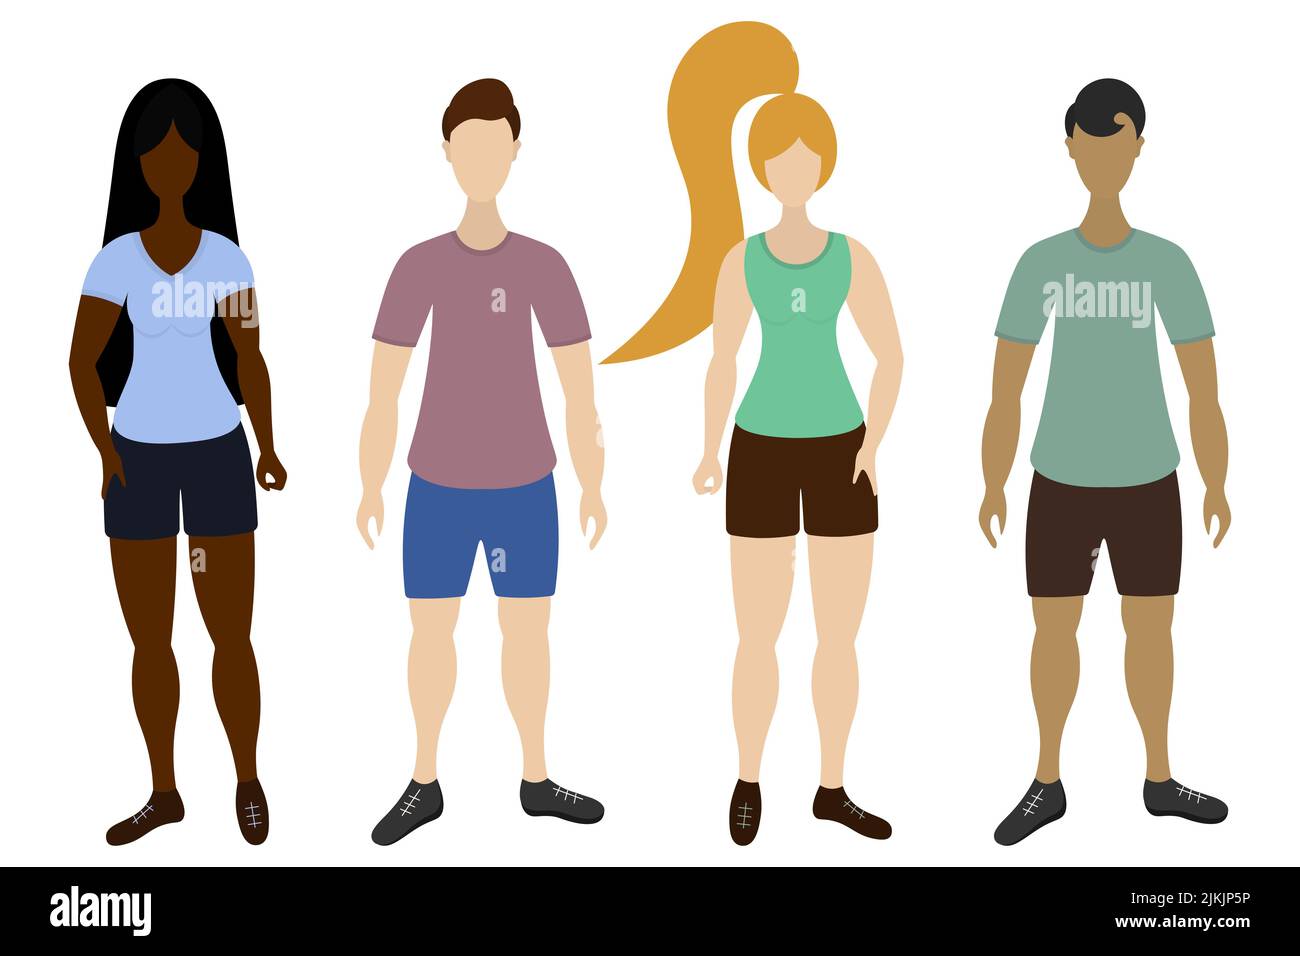 A group of athletes. Men and women of different skin tones. Color vector illustration. People in t-shirts, shorts and sneakers. Isolated background. Stock Vector